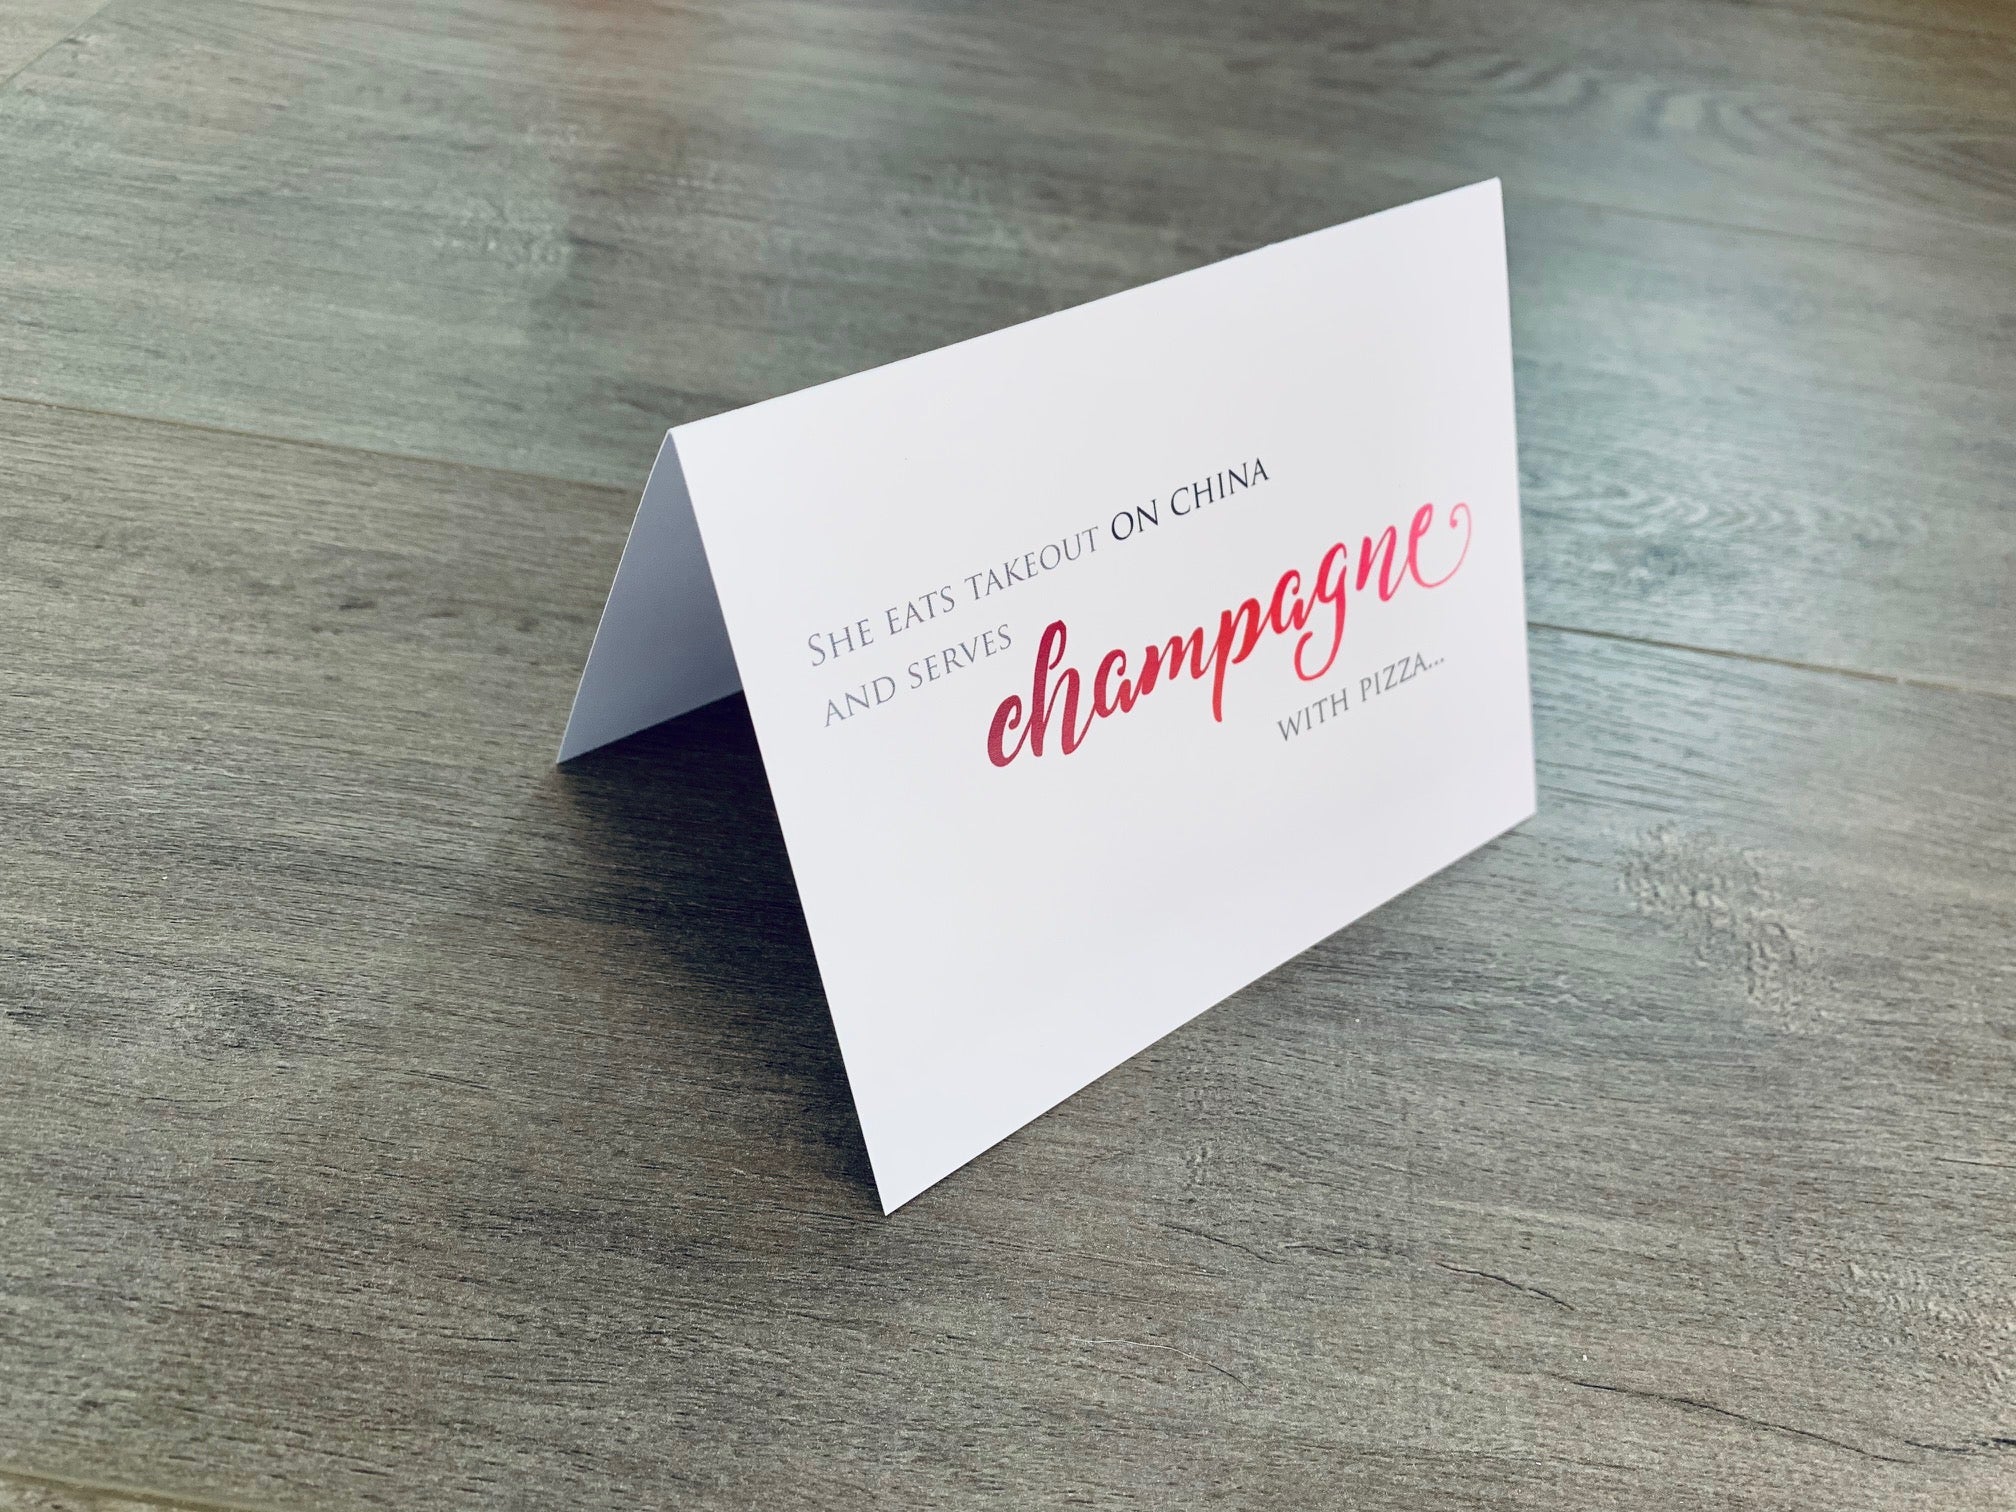 A folded white notecard is propped up on a gray wood floor. The card says, "She eats takeout on china and serves champagne with pizza." Champagne Lovers collection by Stationare.